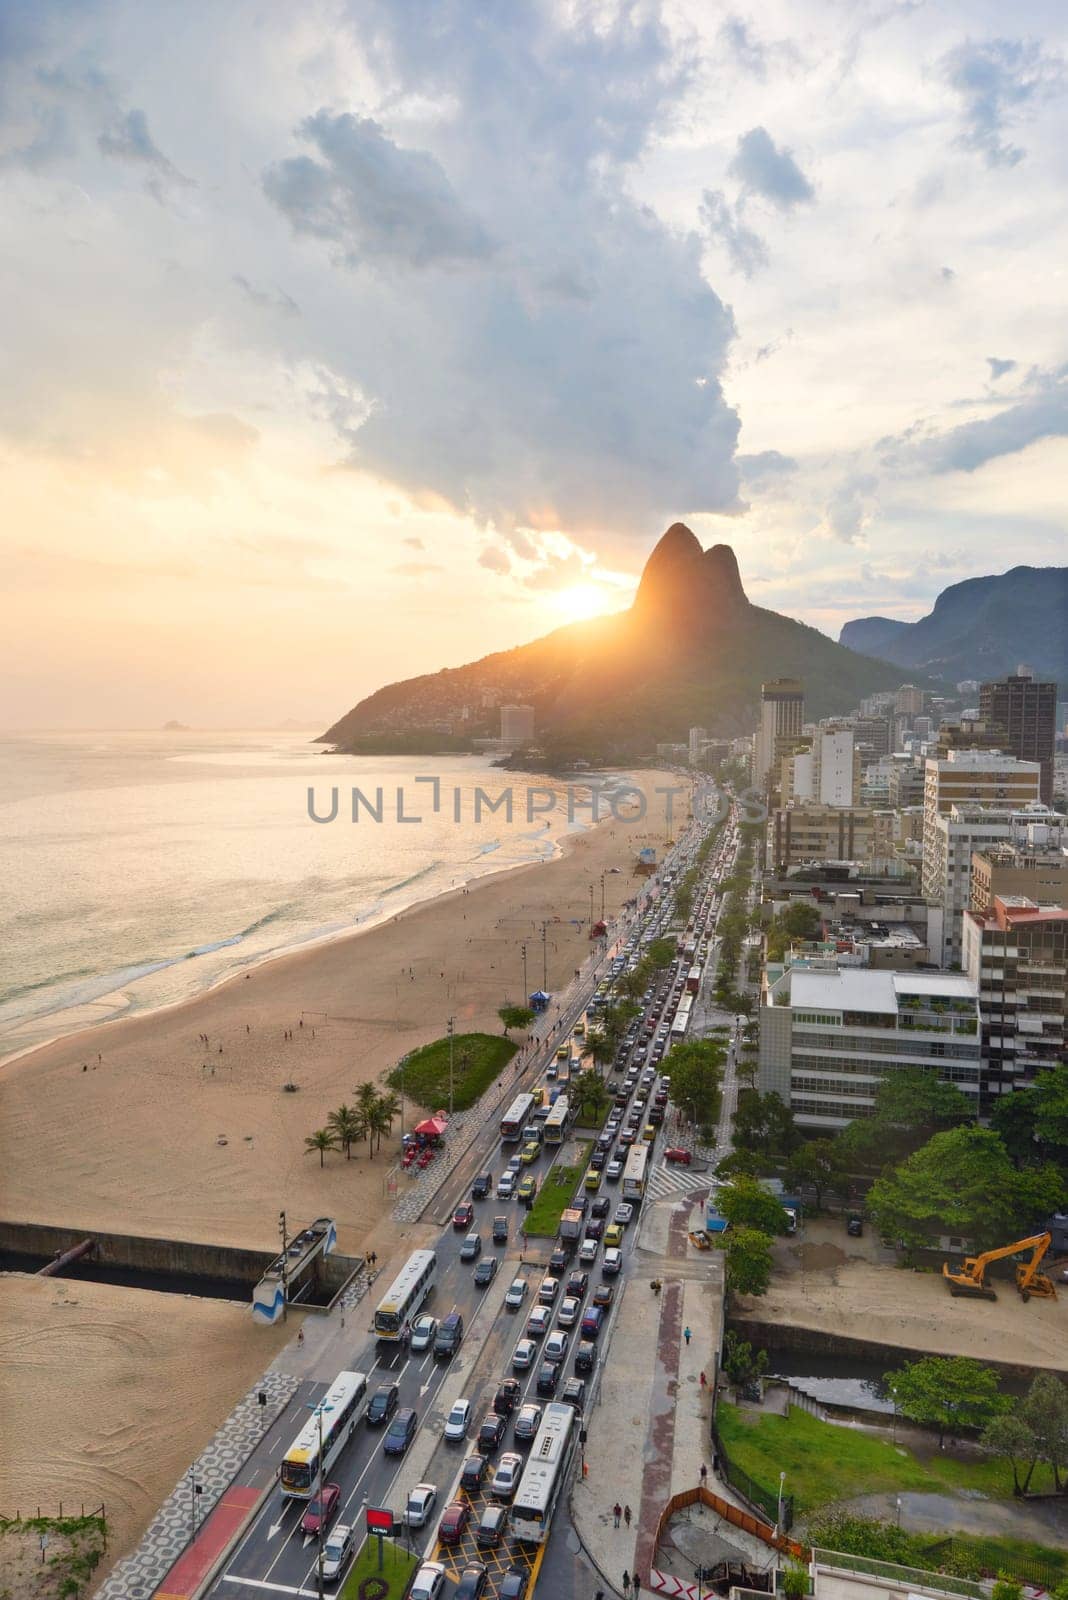 Beach, city and coastal with mountain or building infrastructure or architecture, travel or ocean. Vacation, sand and shoreline in Rio de Janeiro or urban location for Brazil trip, sunset or summer.